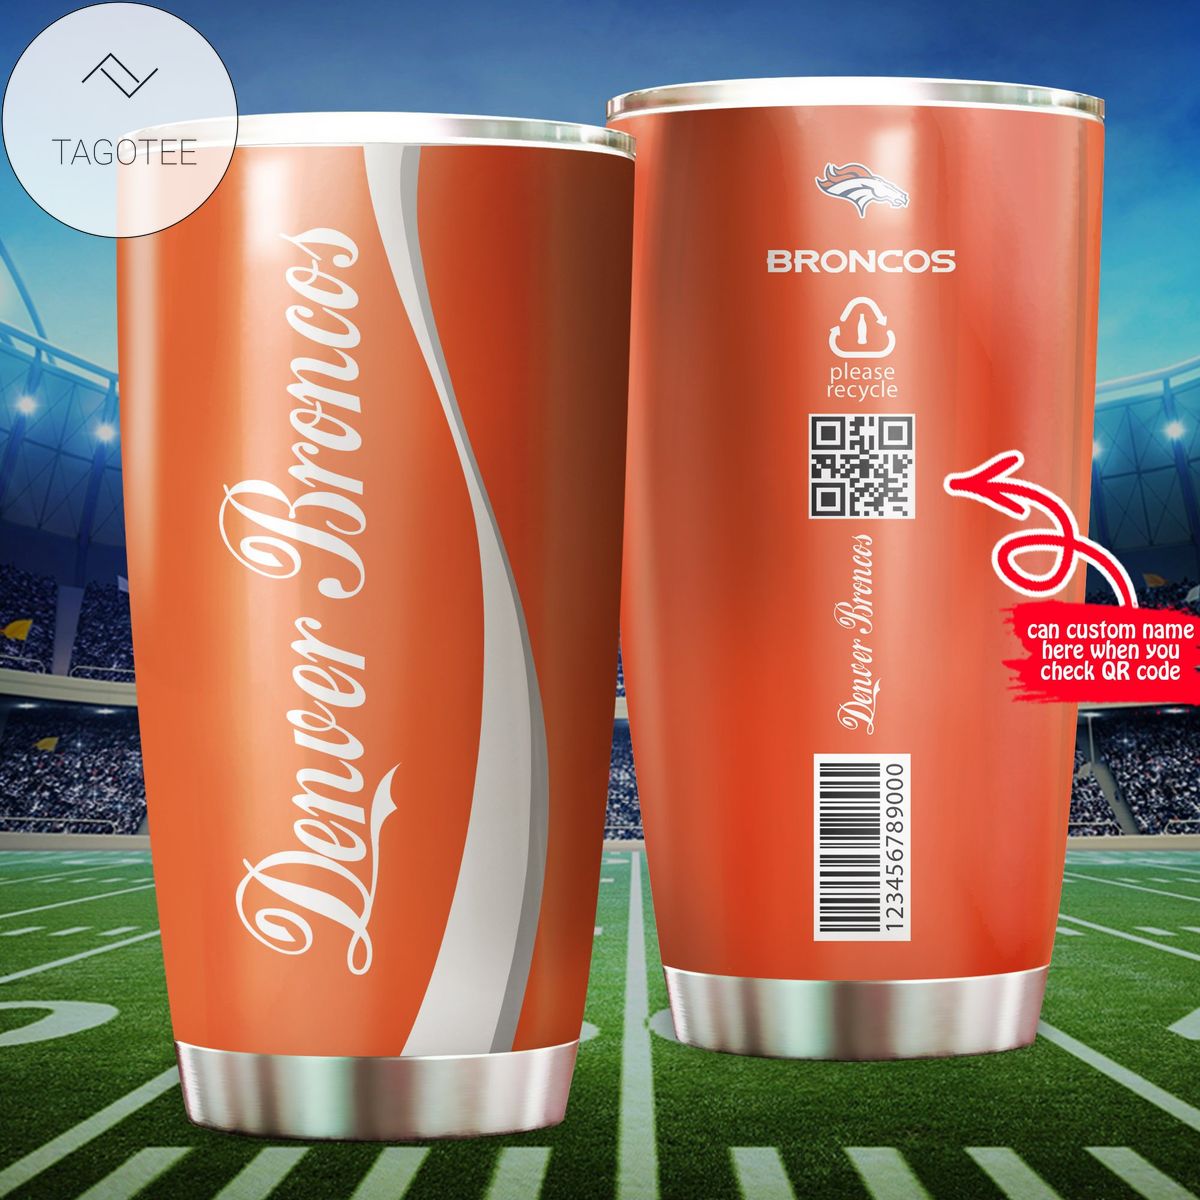 Denver Broncos Coca Cola Design Custom Name QR Code Stainless Steel Tumblers Cup 20 oz Drinkware Personalized Gifts For NFL Fans